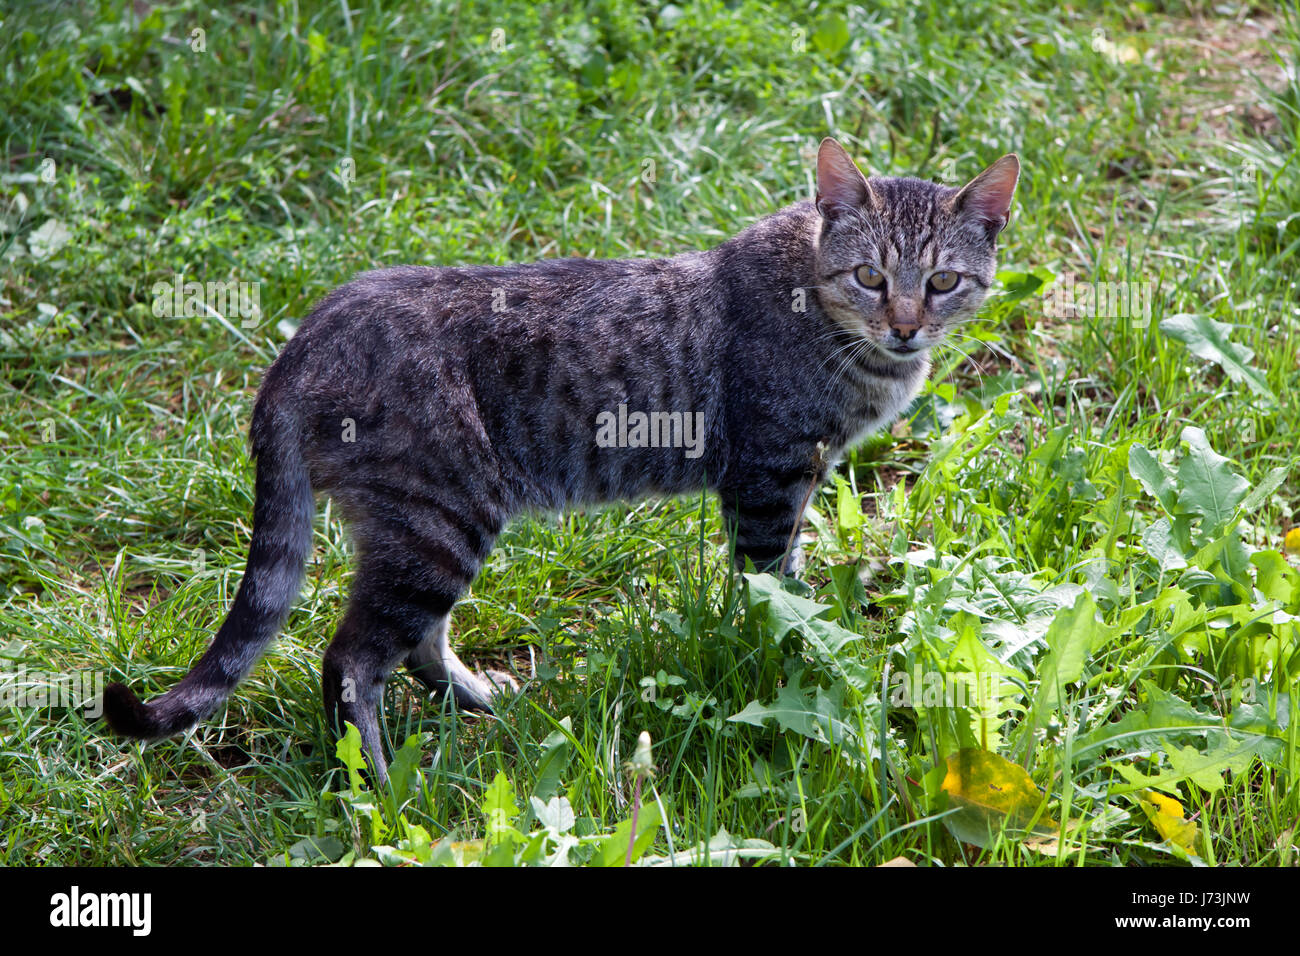 young cat in the grass Stock Photo